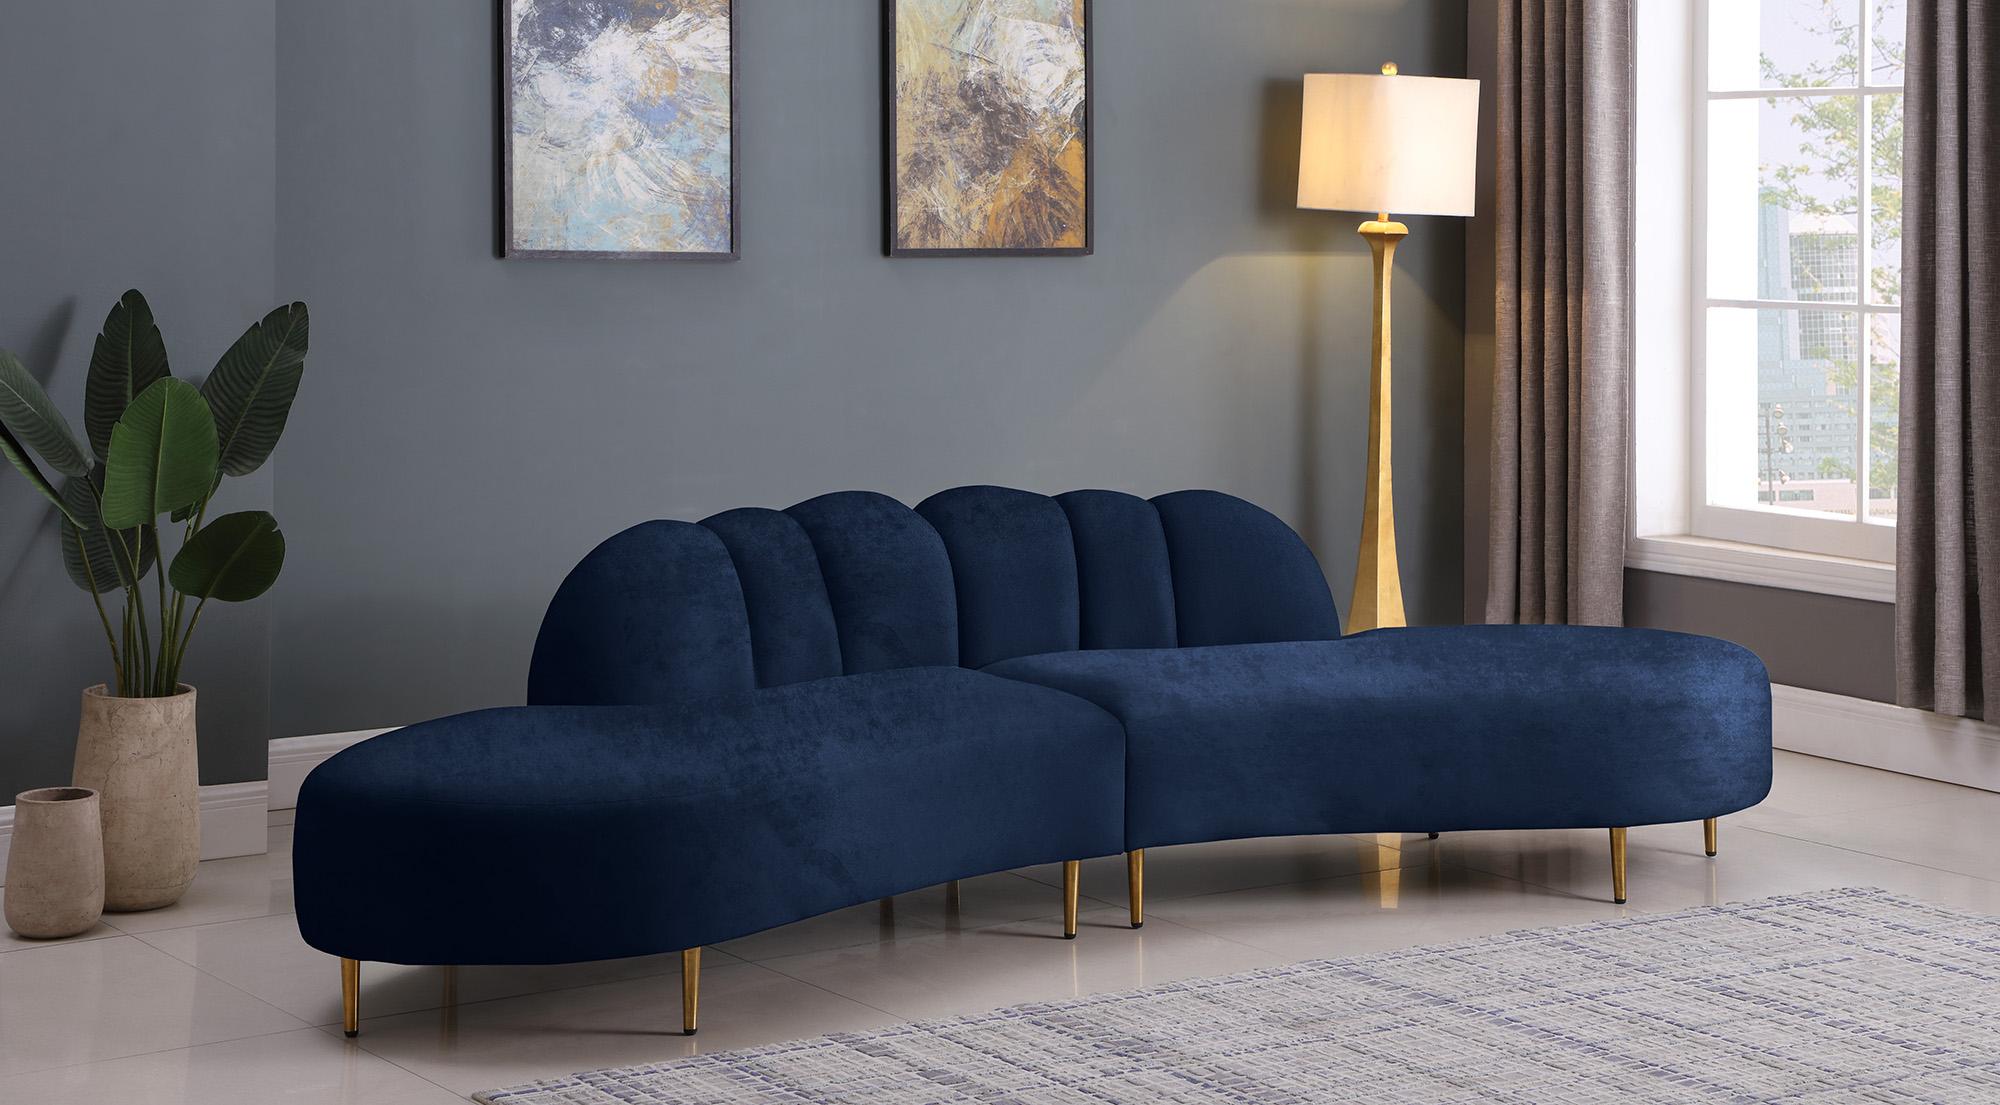 

    
Meridian Furniture DIVINE 618Navy Sectional Sofa Navy 618Navy-Sectional
